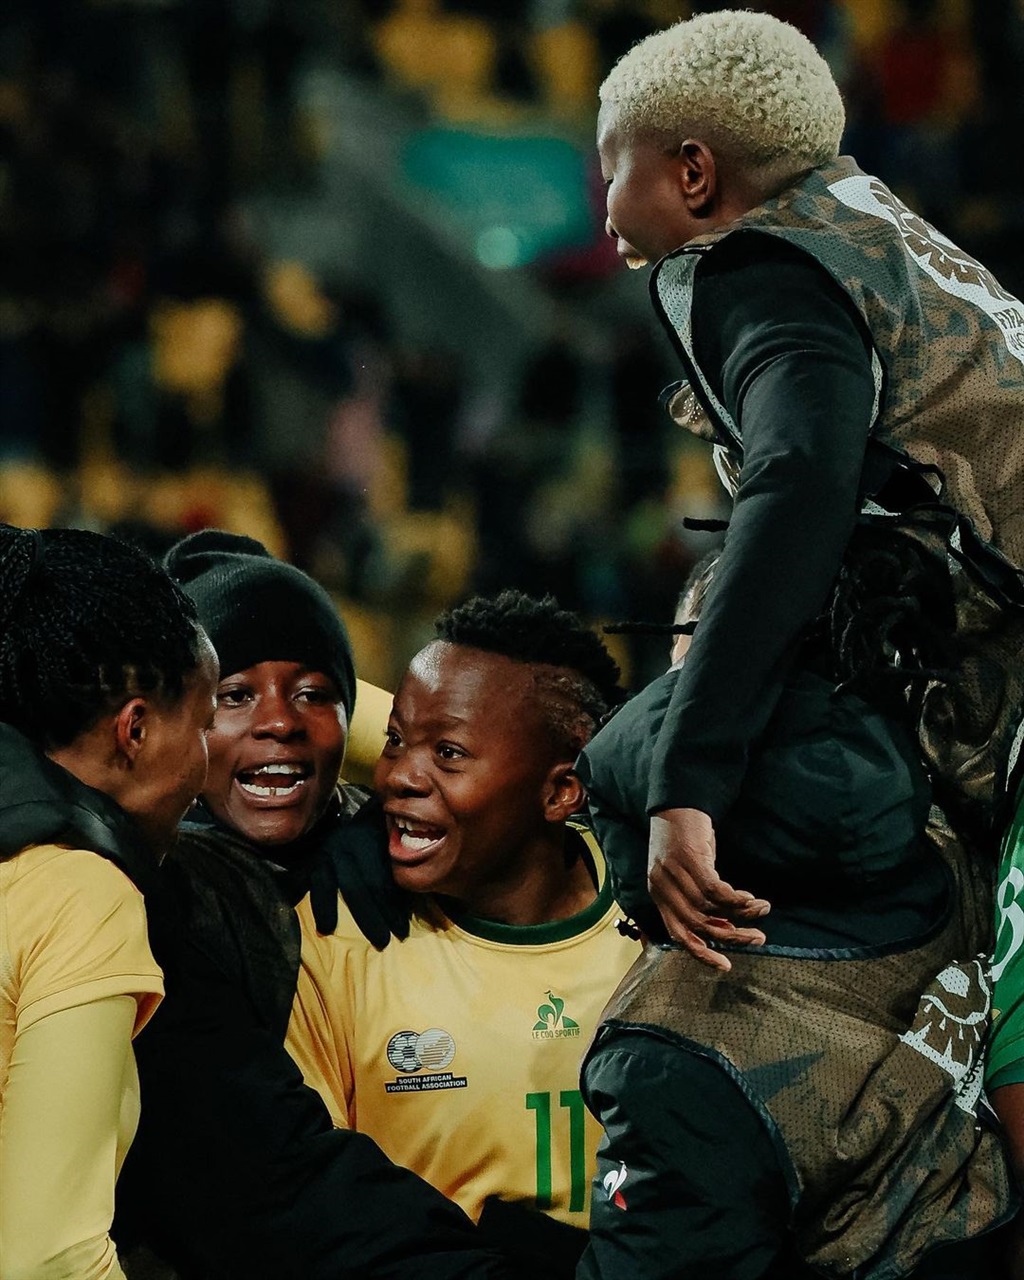 Banyana Banyana made history yesterday as the first South African team to make it into the knockout rounds of a World Cup.